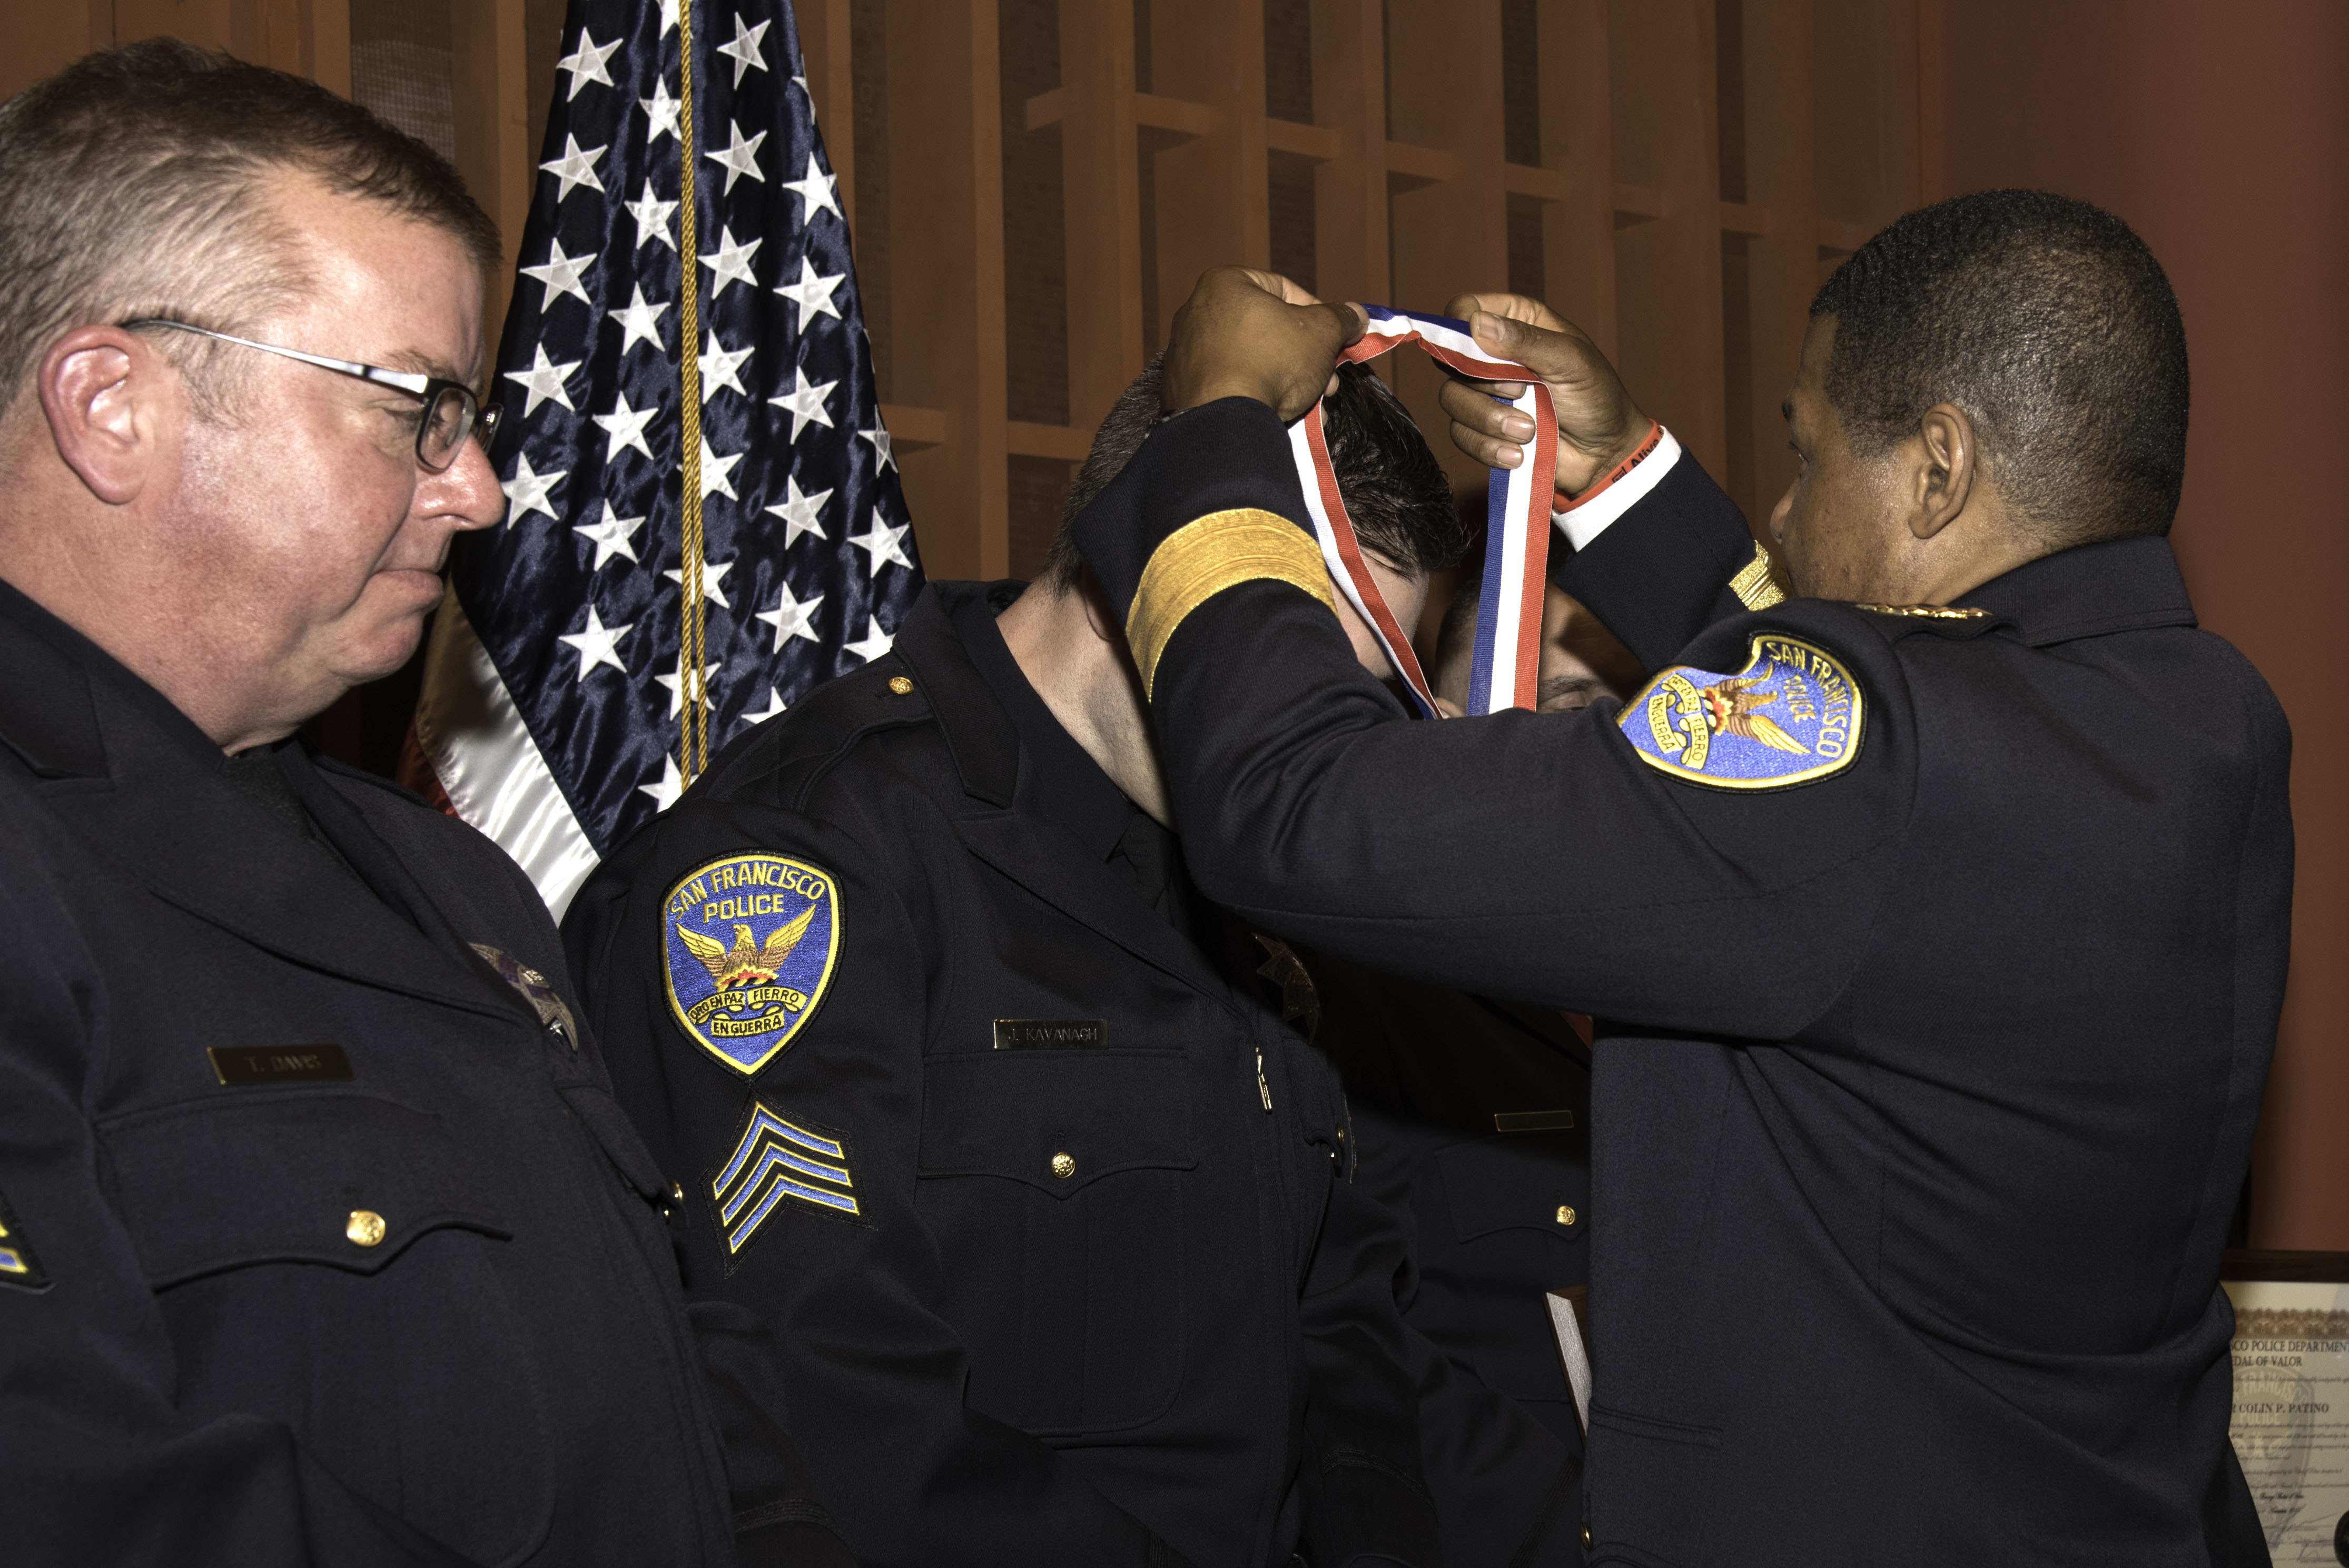 Chief putting ribbon on Officer